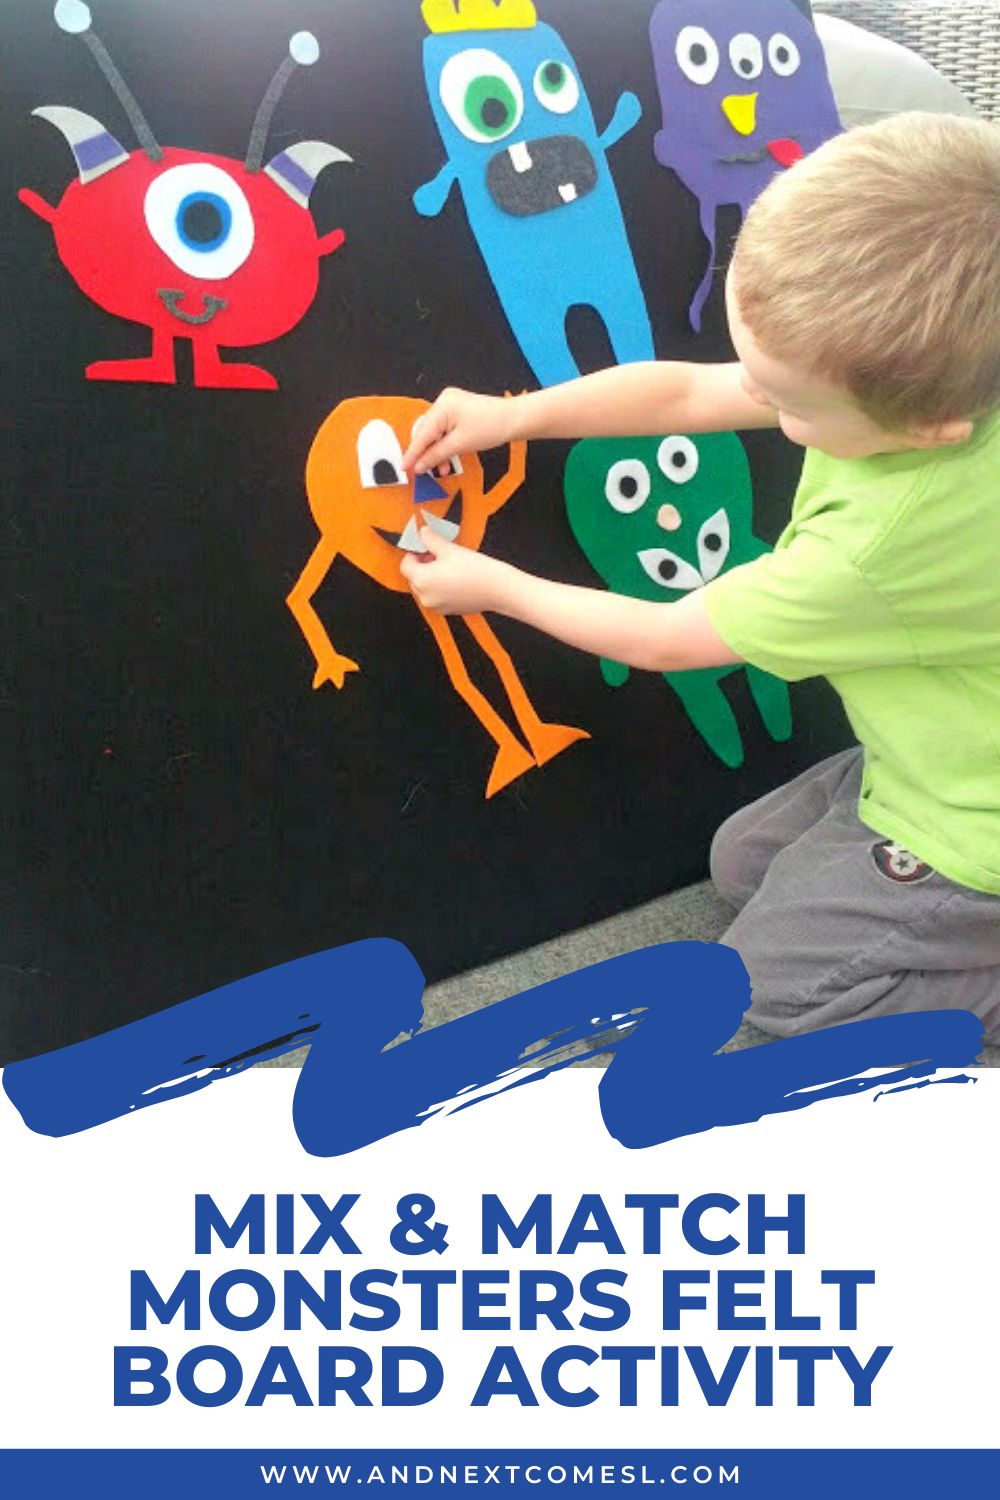 Mix and match monsters felt board activity for toddlers and preschoolers